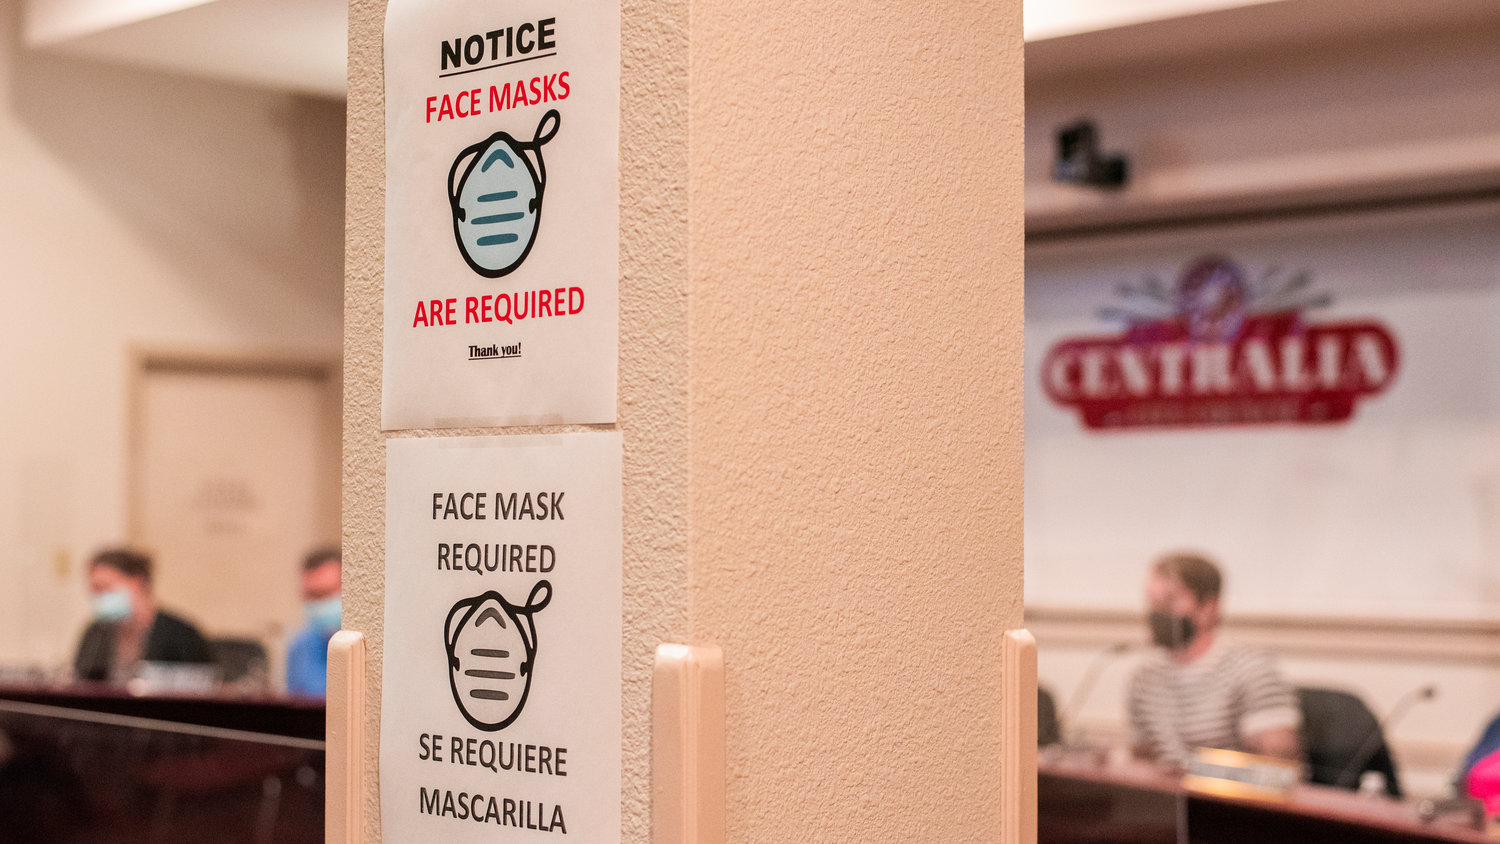 A notice for face masks is displayed inside Centralia City Hall Tuesday night during a meeting.